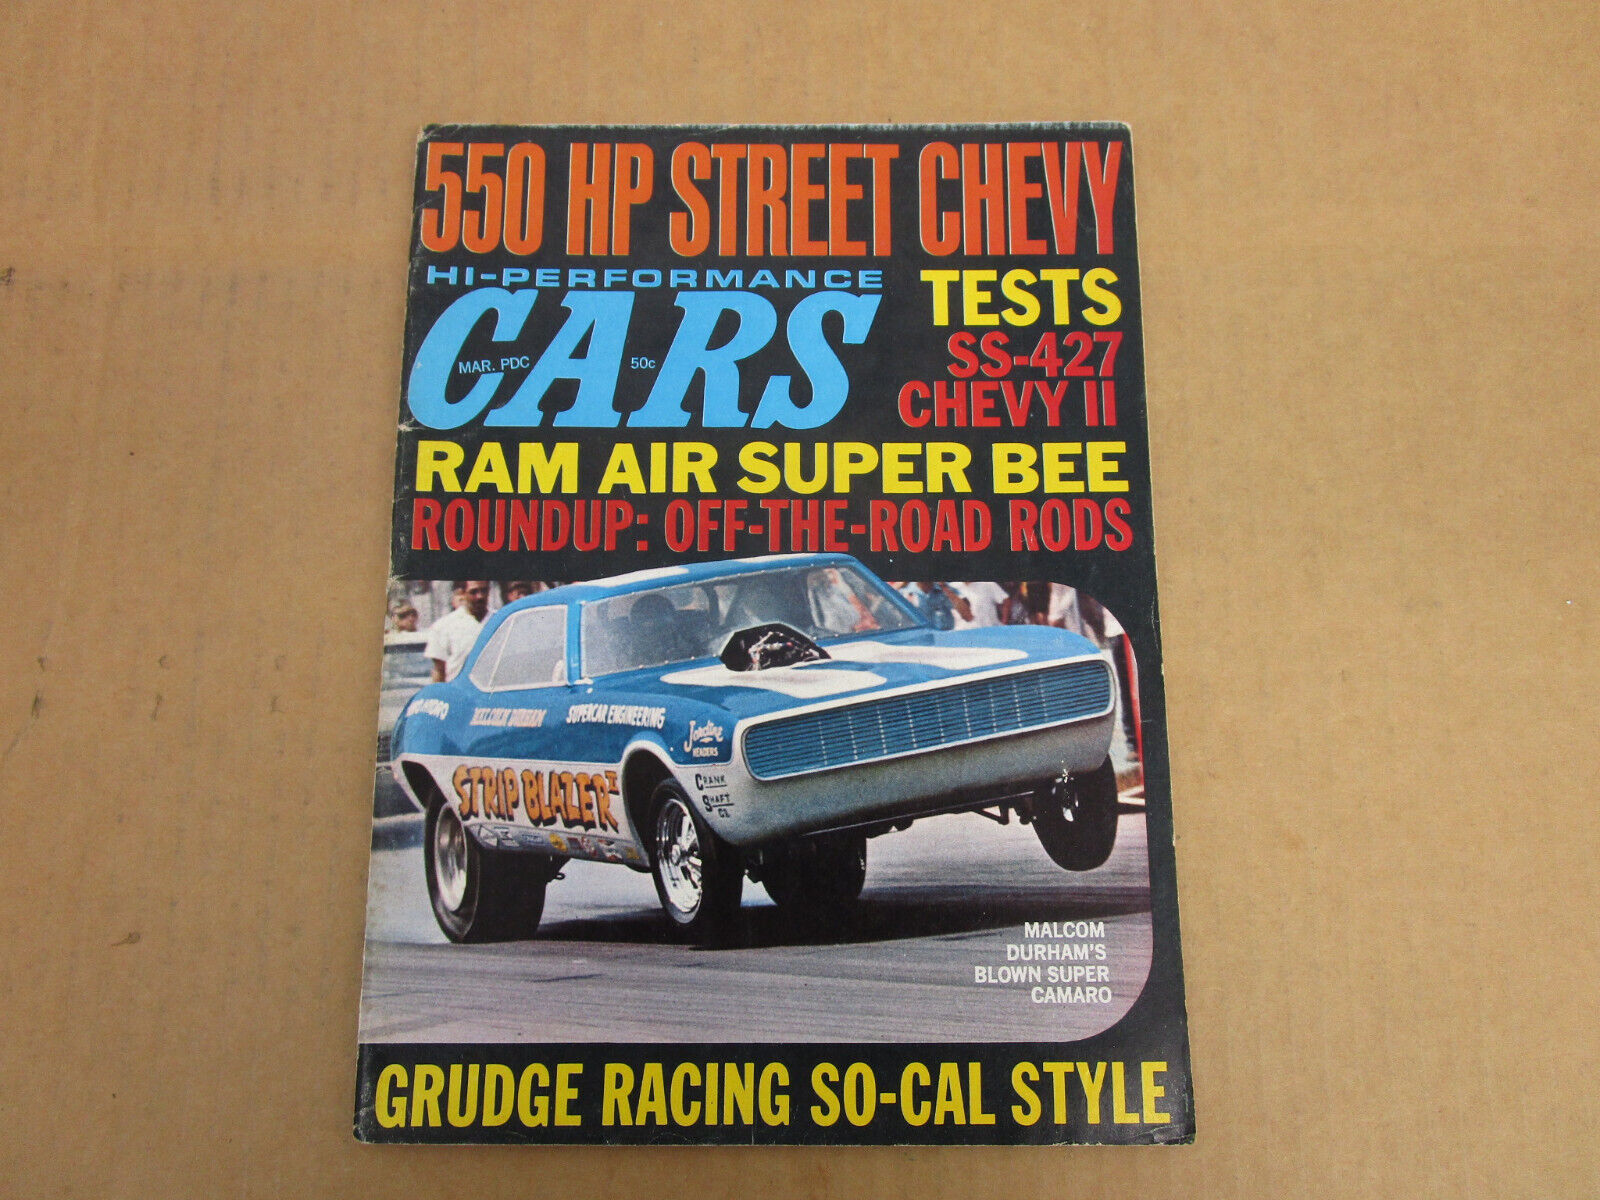 HI-PERFORMANCE CARS magazine March 1969 drag race muscle Chevy II Super Bee